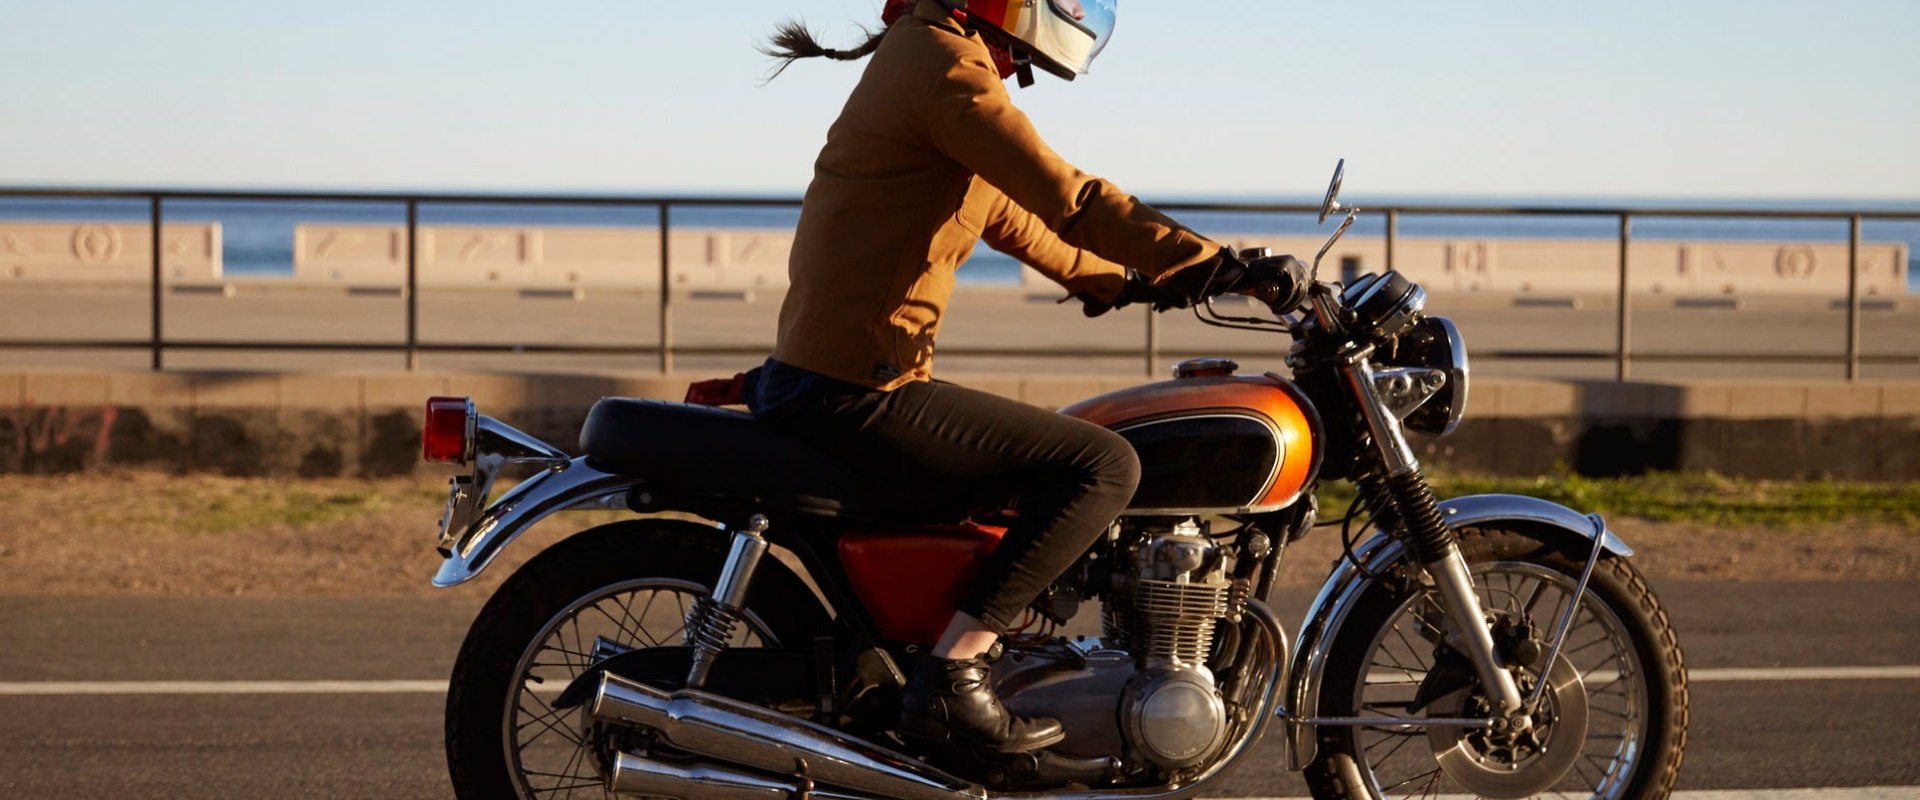 Online Motorcycle Insurance for First Time Riders